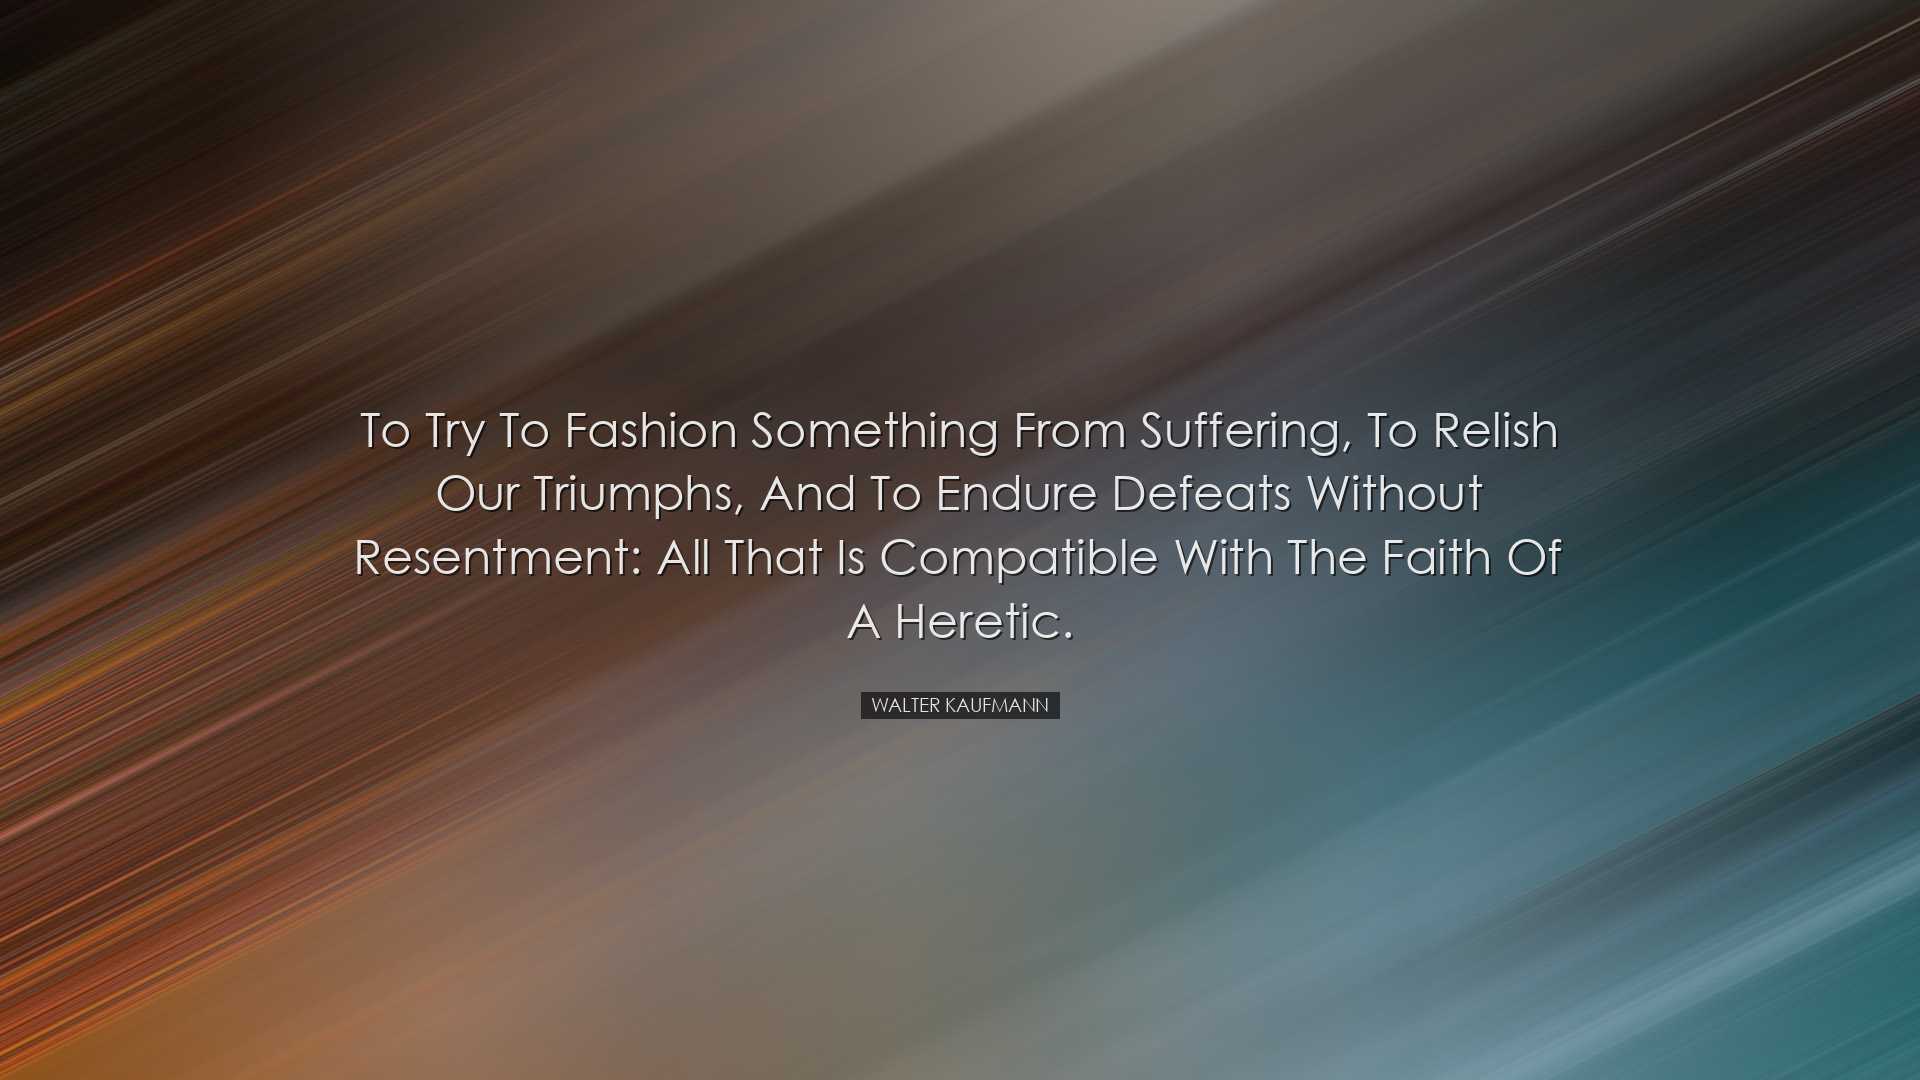 To try to fashion something from suffering, to relish our triumphs